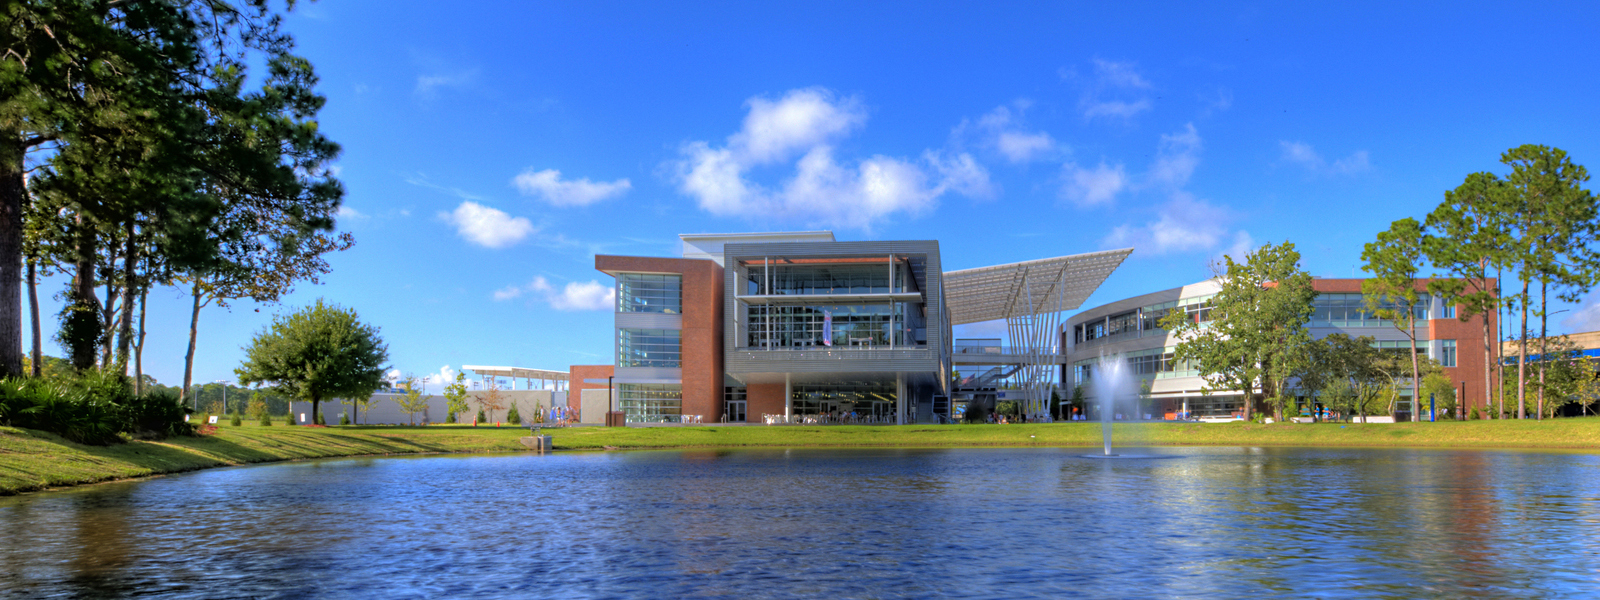 UNF Student Union is viewed across a lake.